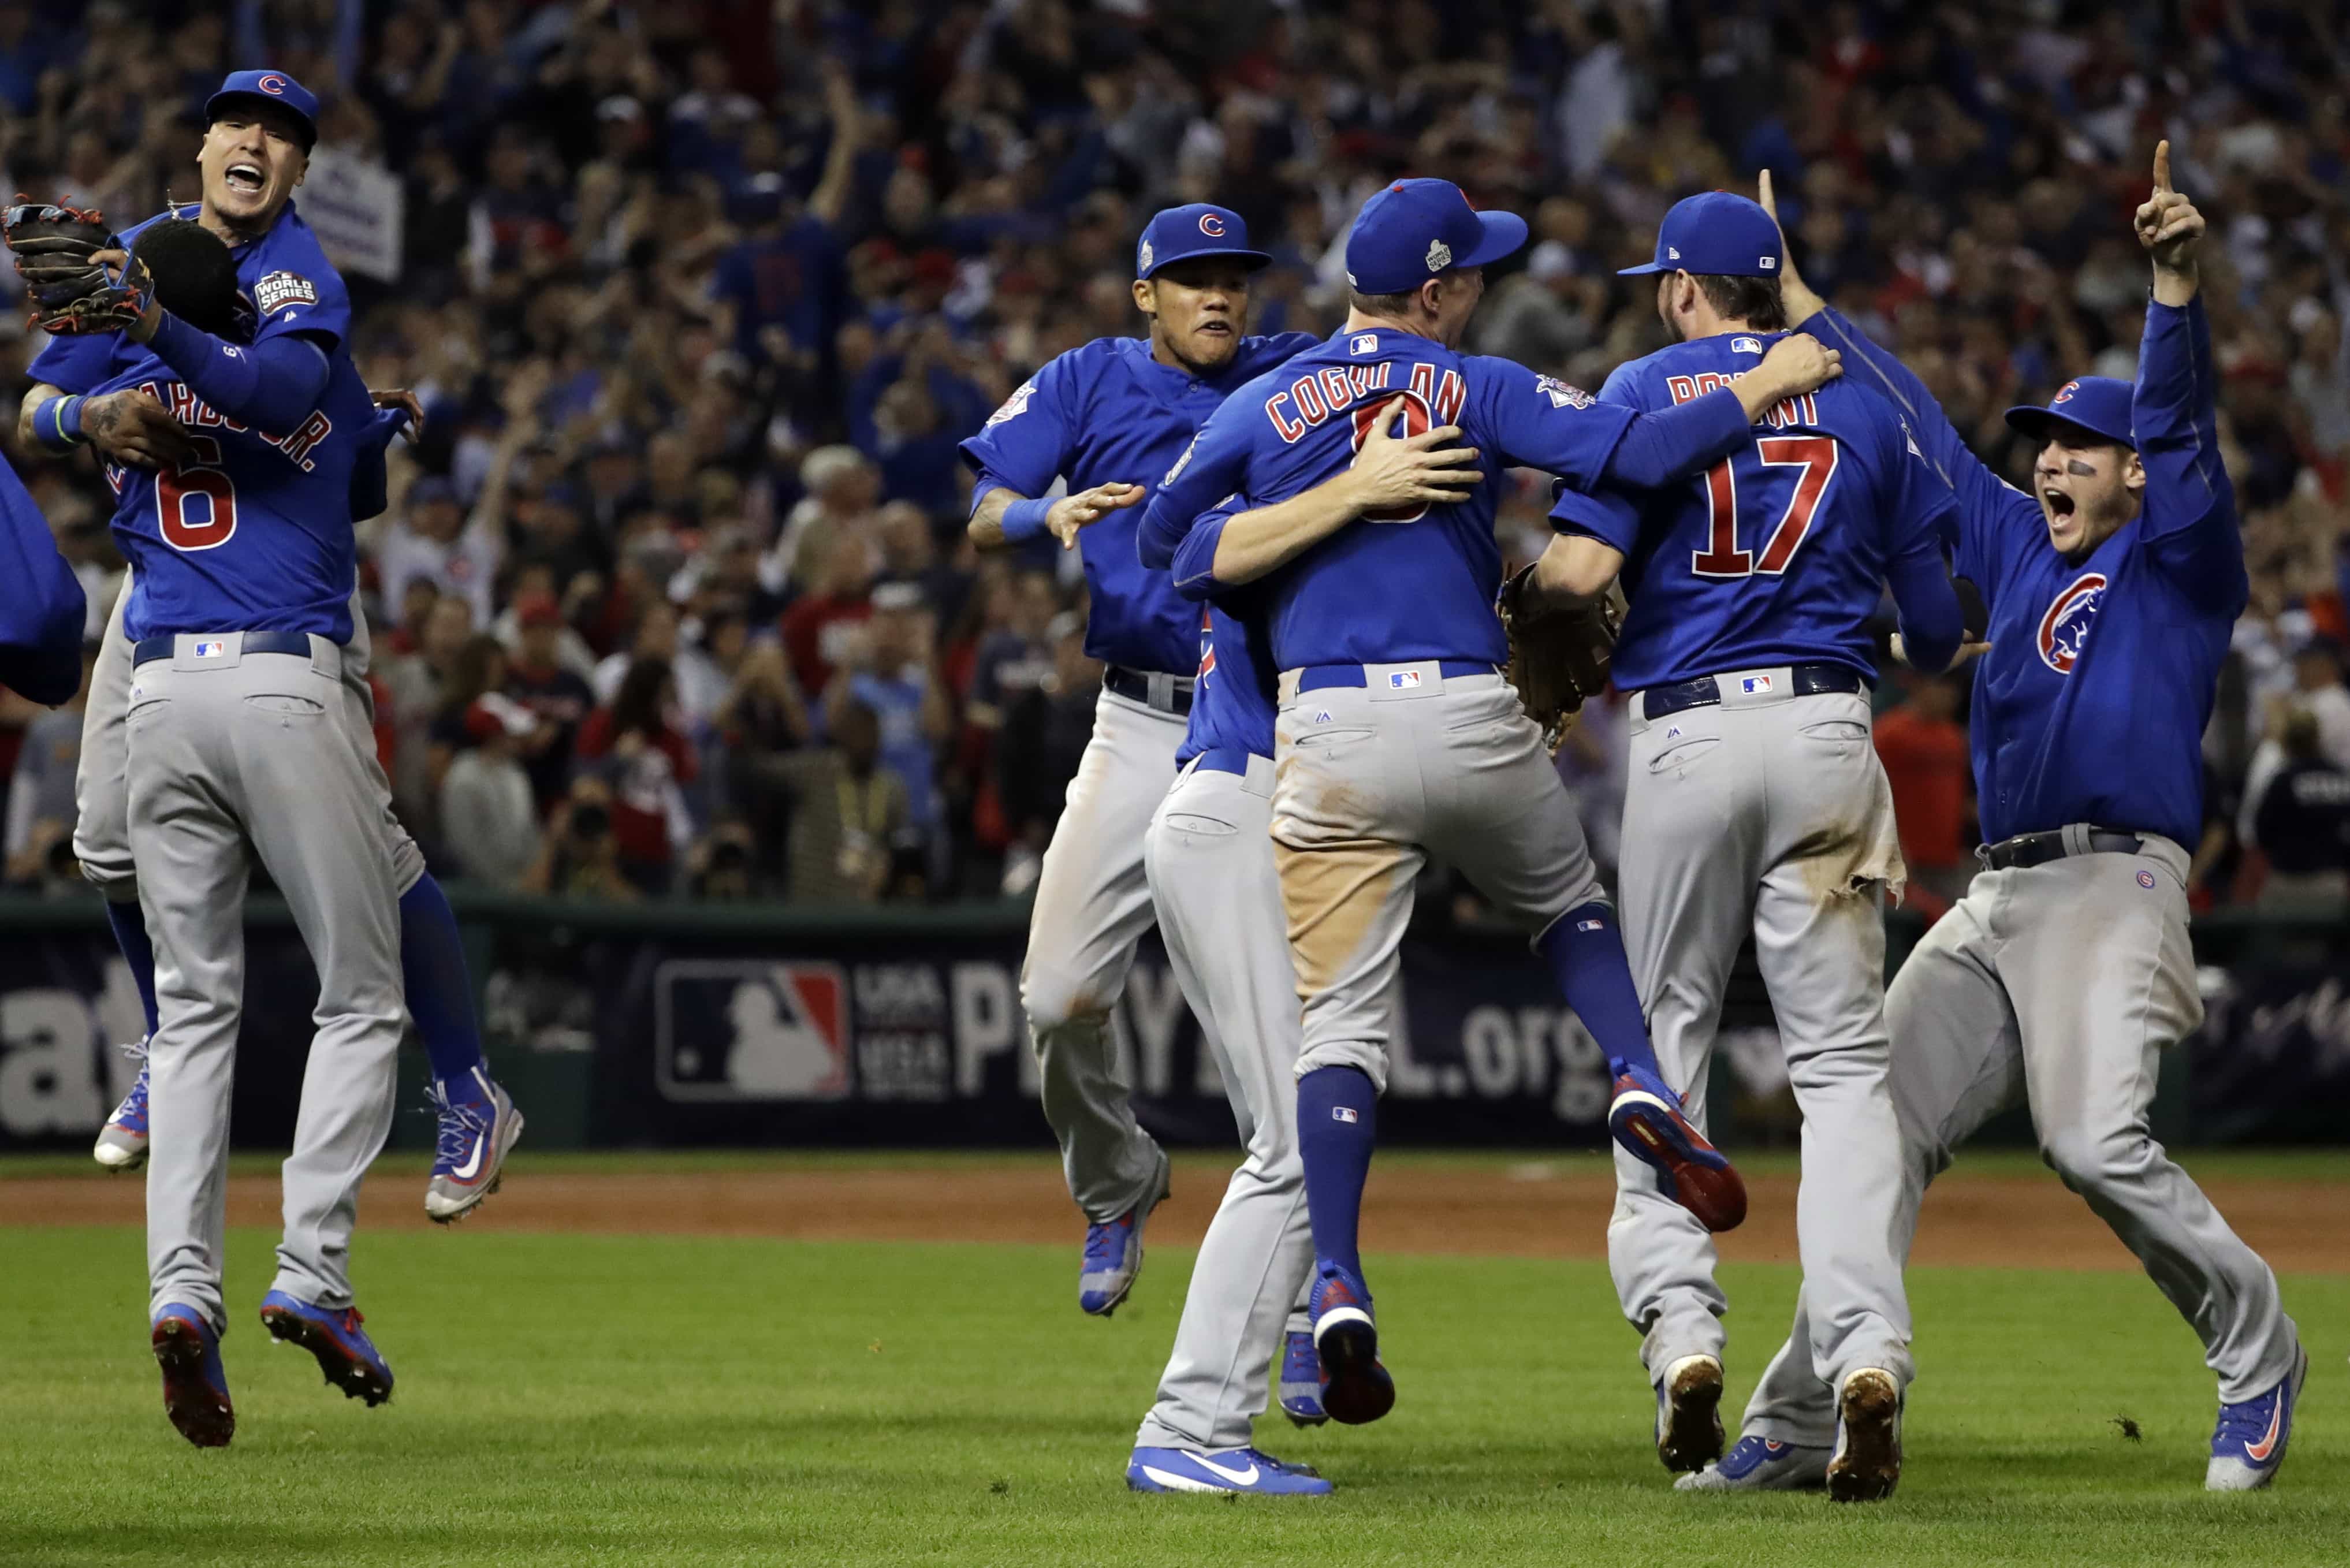 The Chicago Cubs have won The World Series! - 95.3 MNC4069 x 2715